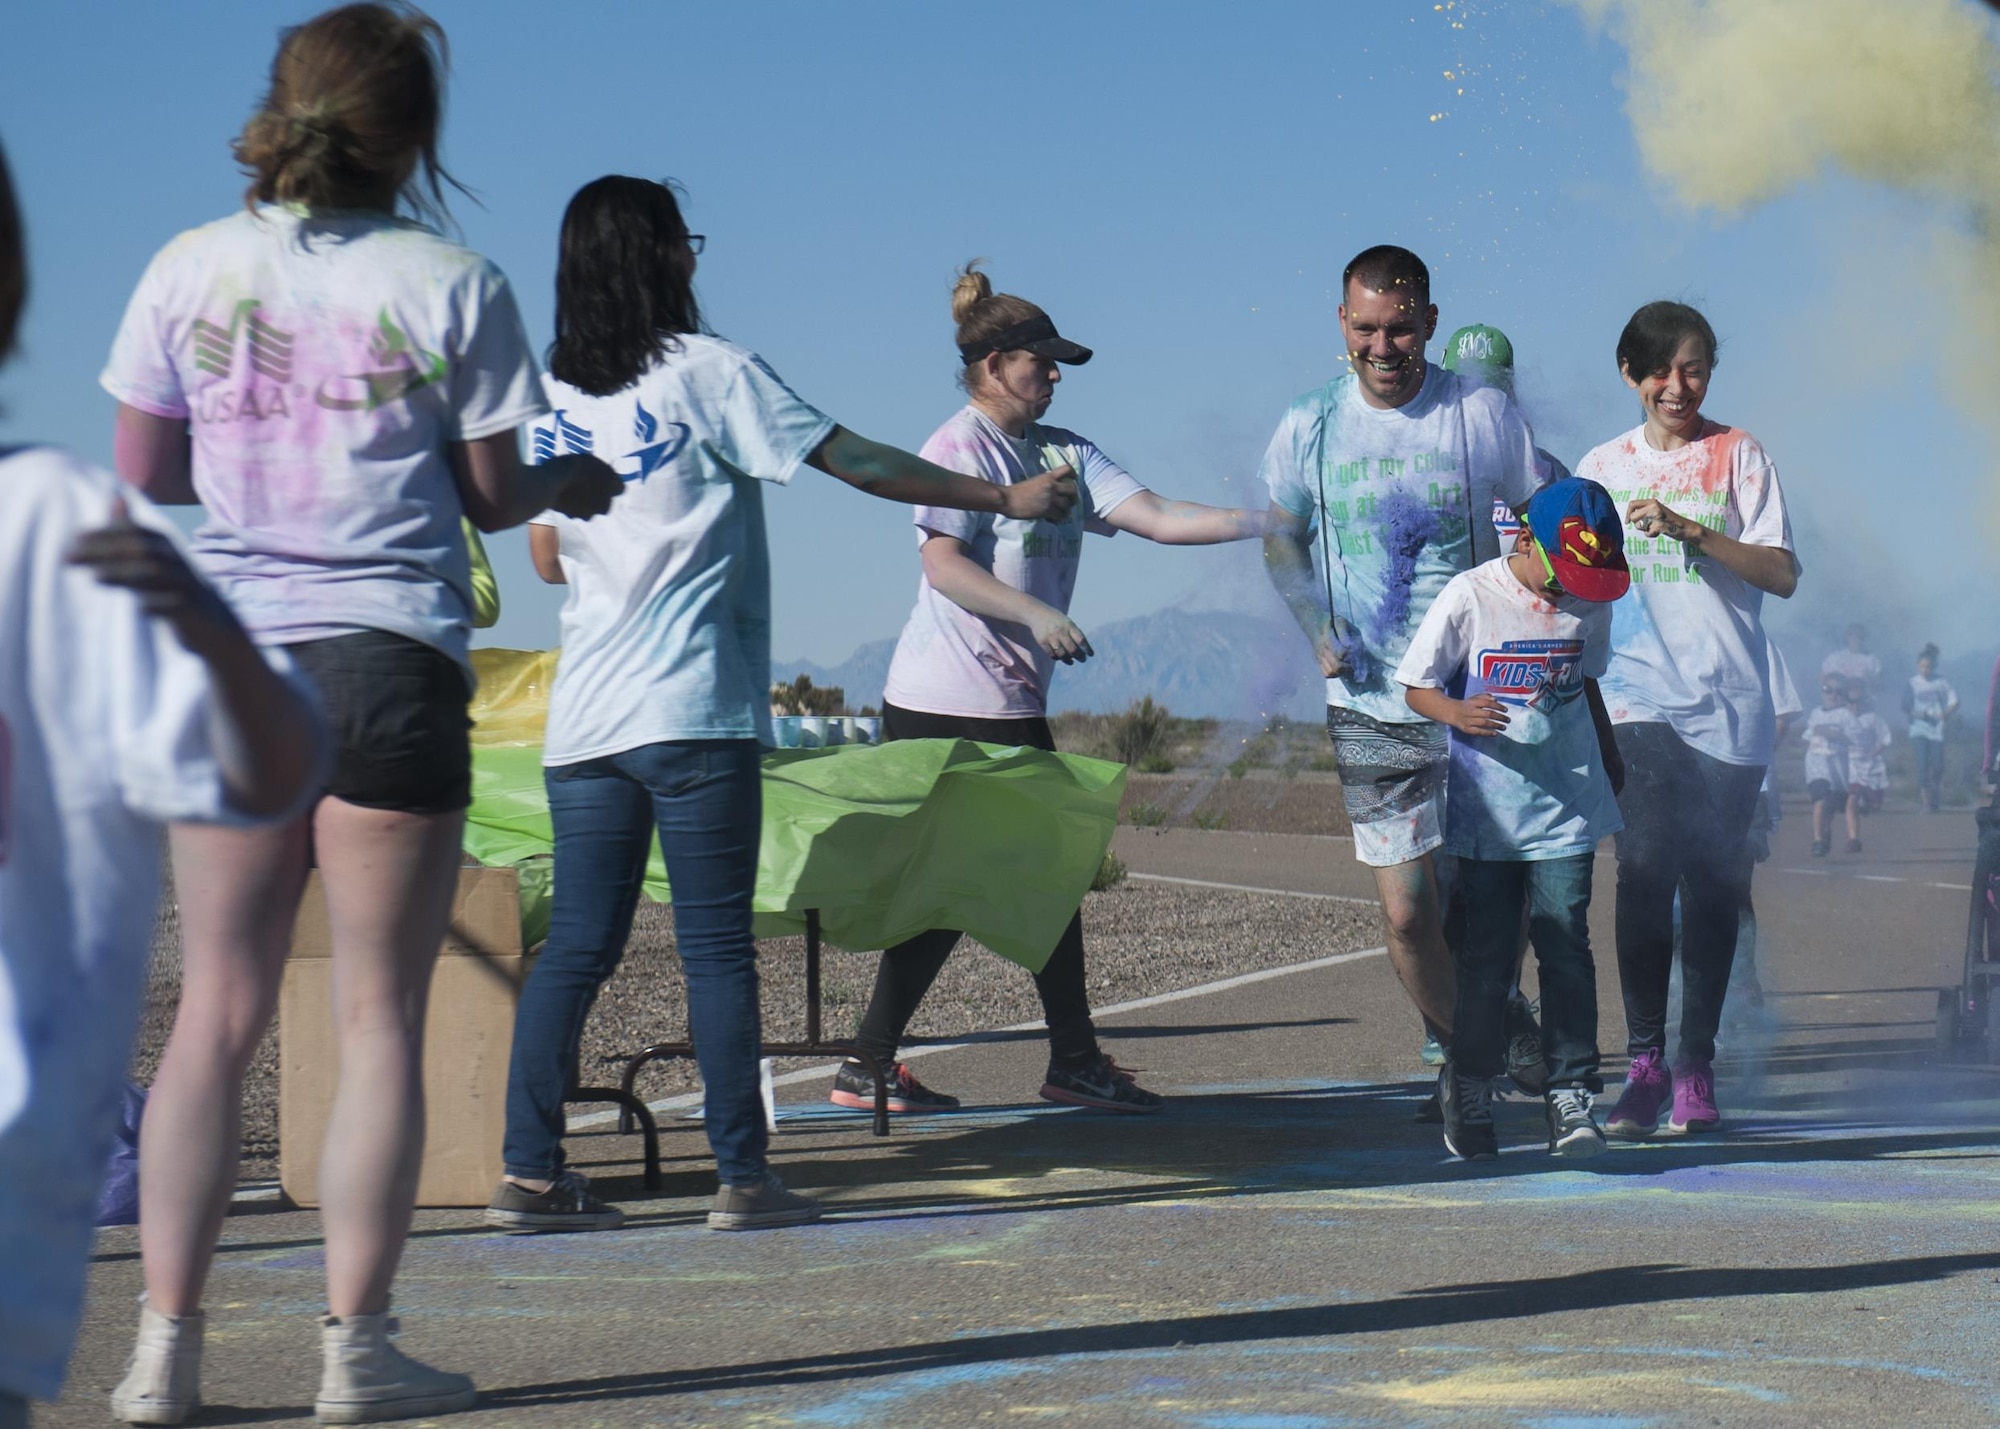 The Youth and Teen Center hosted the Art Blast color run 5K and the America’s Armed Forces Kids fun run at Holloman Air Force Base, N.M on May 20, 2017. During the run, volunteers set up tables along the track with various colored paint powder to toss at the runners transforming their fresh white shirts into a colorful canvas. (U.S. Air Force photo by Airman 1st Class Ilyana A. Escalona)